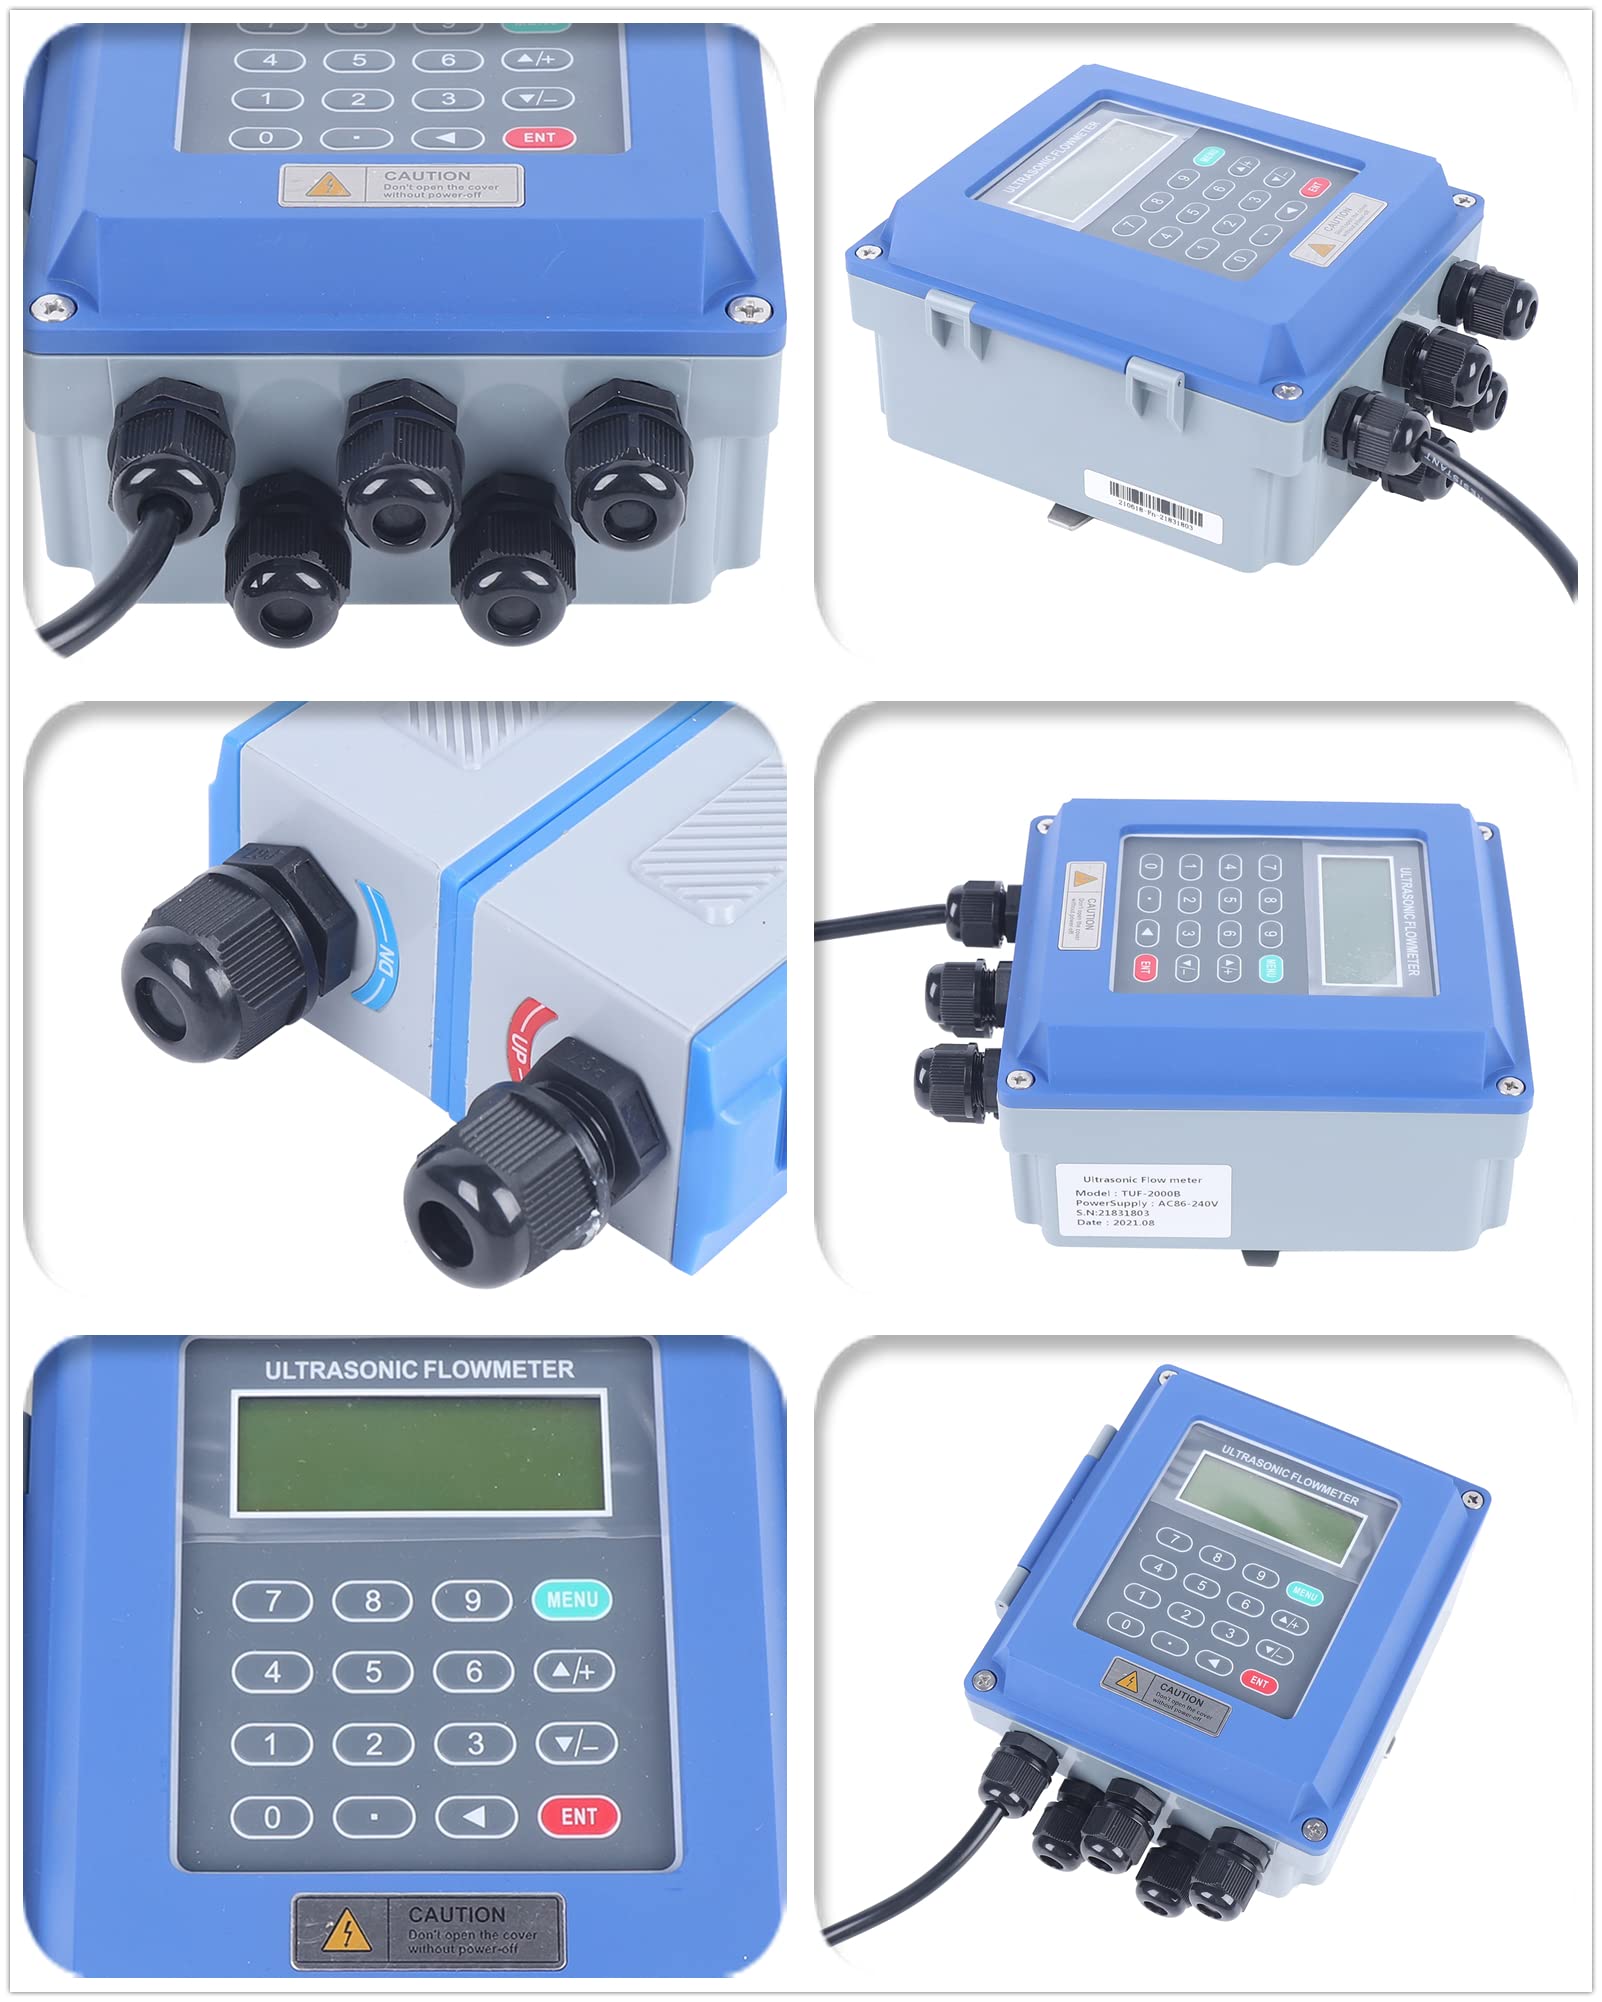 Ultrasonic Flow Meter TUF-2000B Liquid Water Flow Control Meter Flowmeter Counter LCD Display with TS-2 & TM-1 Clamp-on Transducers DN20-700mm